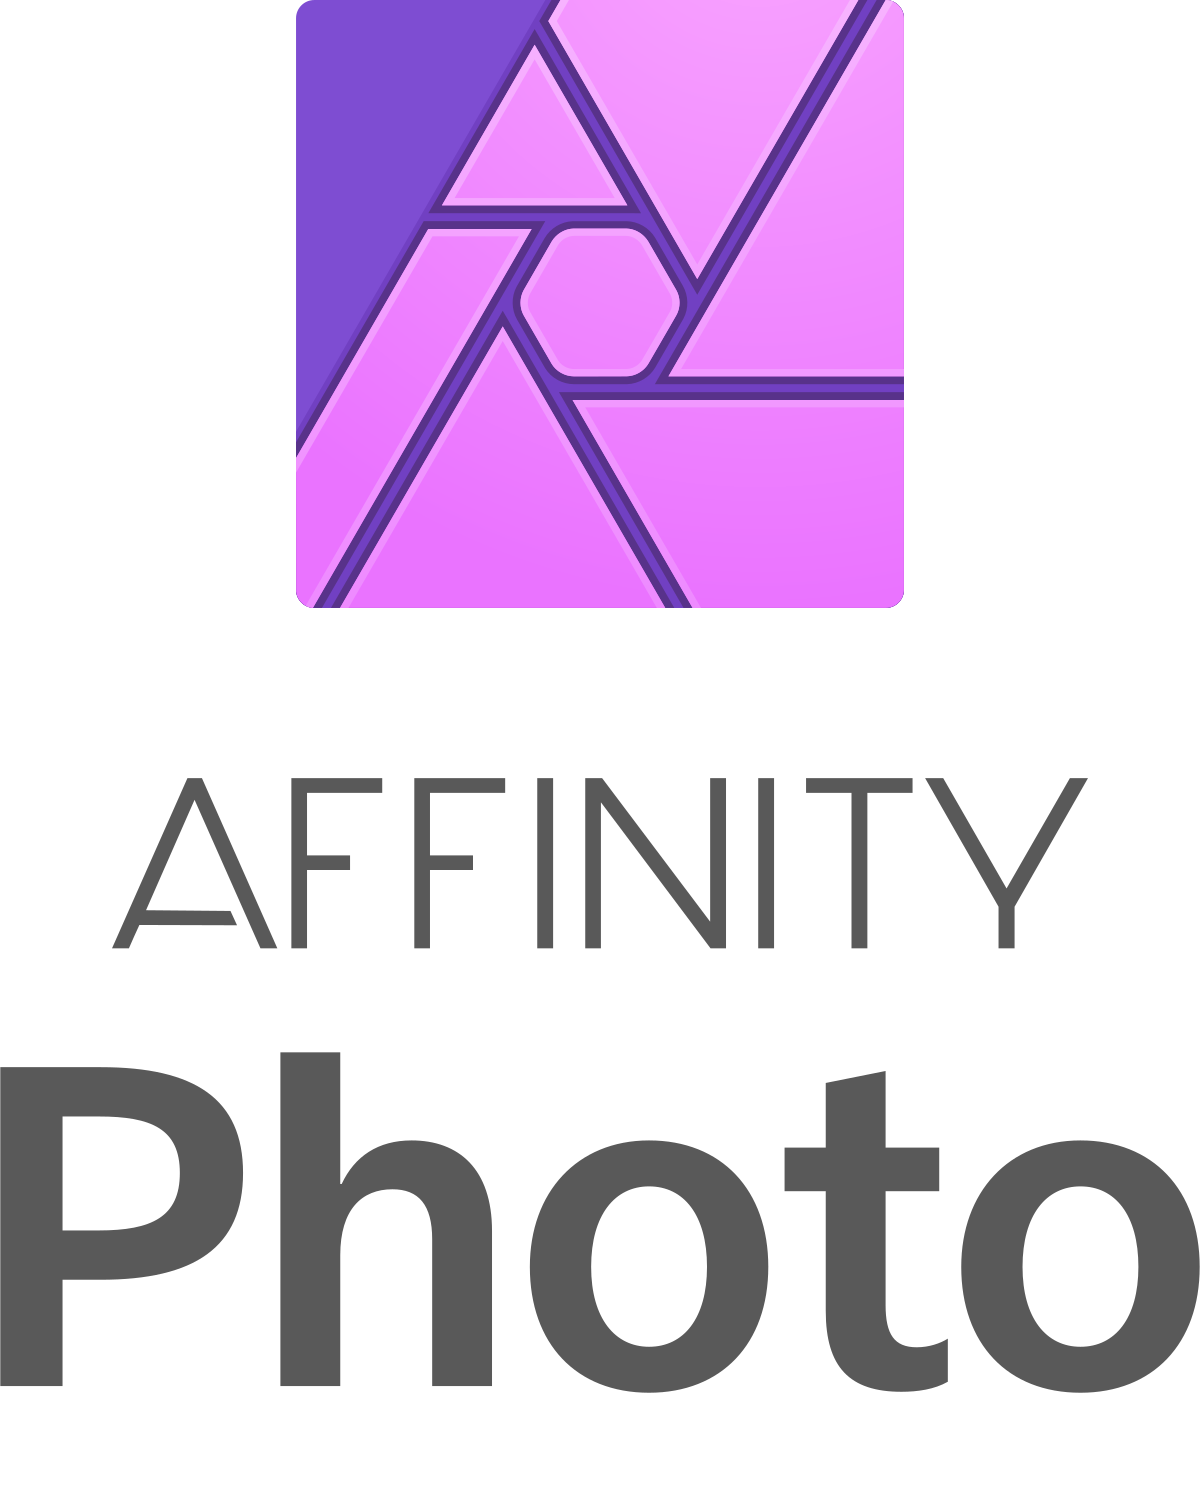 Affinity Photo: Revolutionizing Image Editing One Pixel at a Time